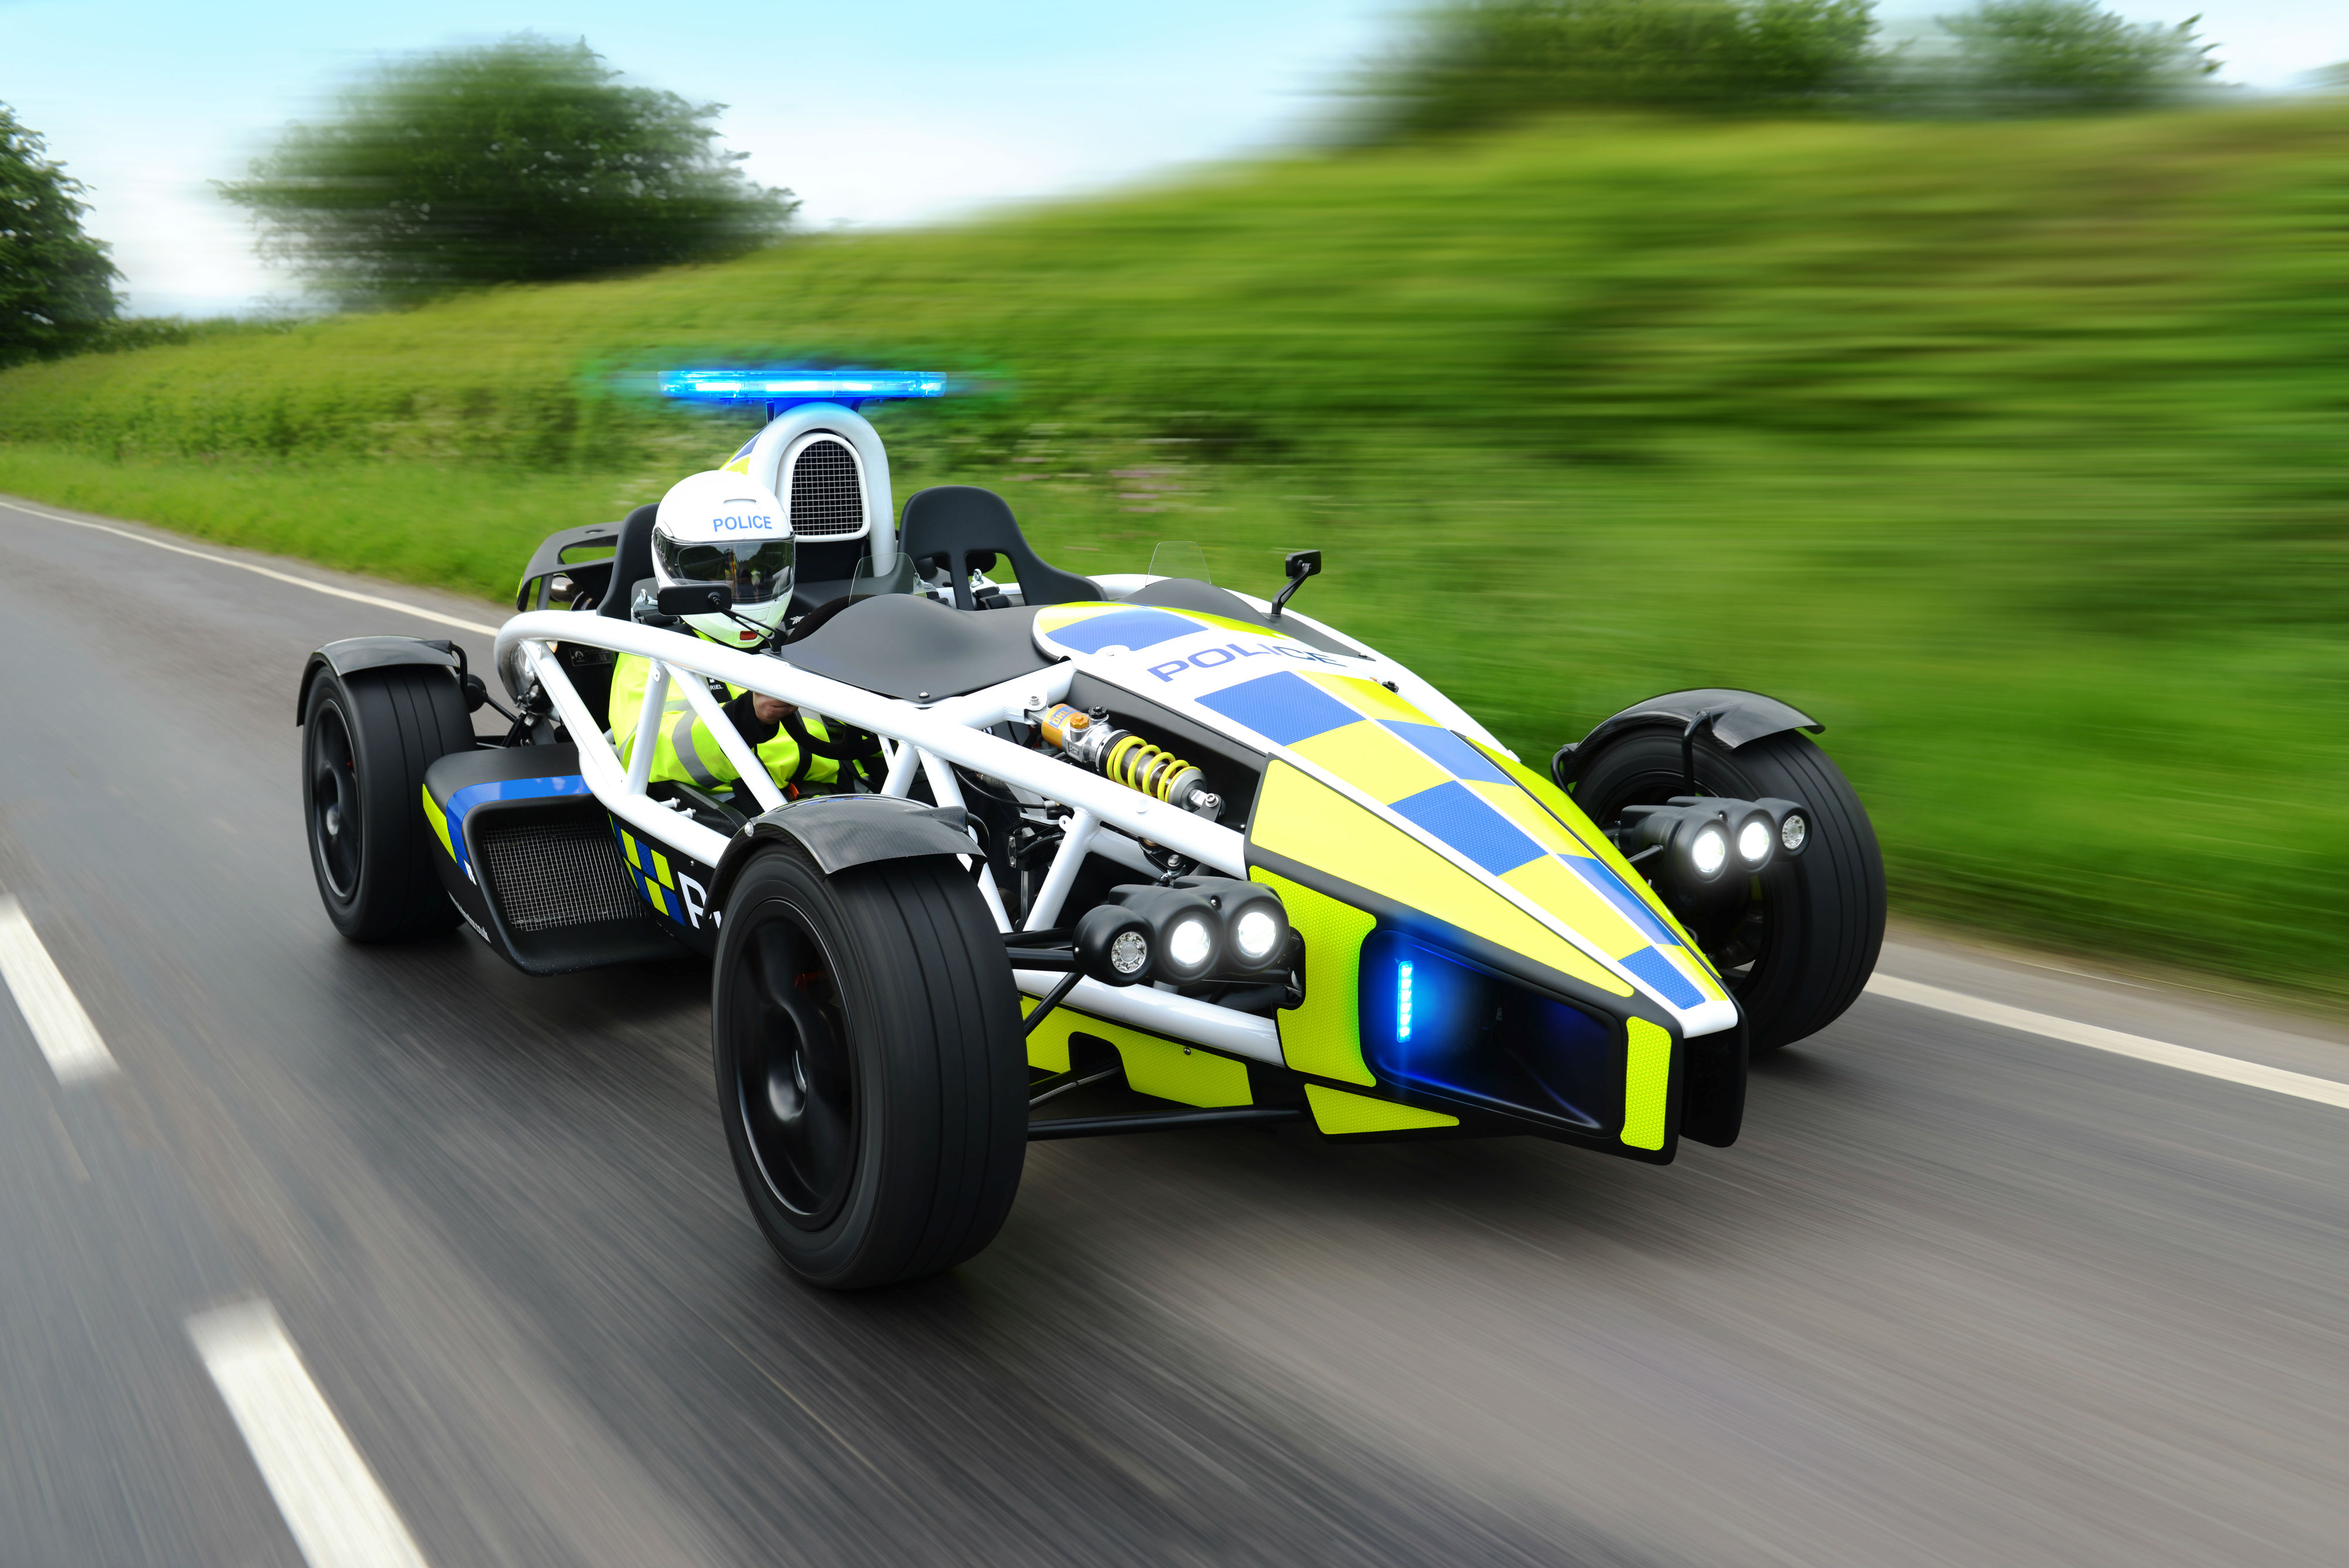 Police draft in 350bhp Ariel Atom for motorcycle operation